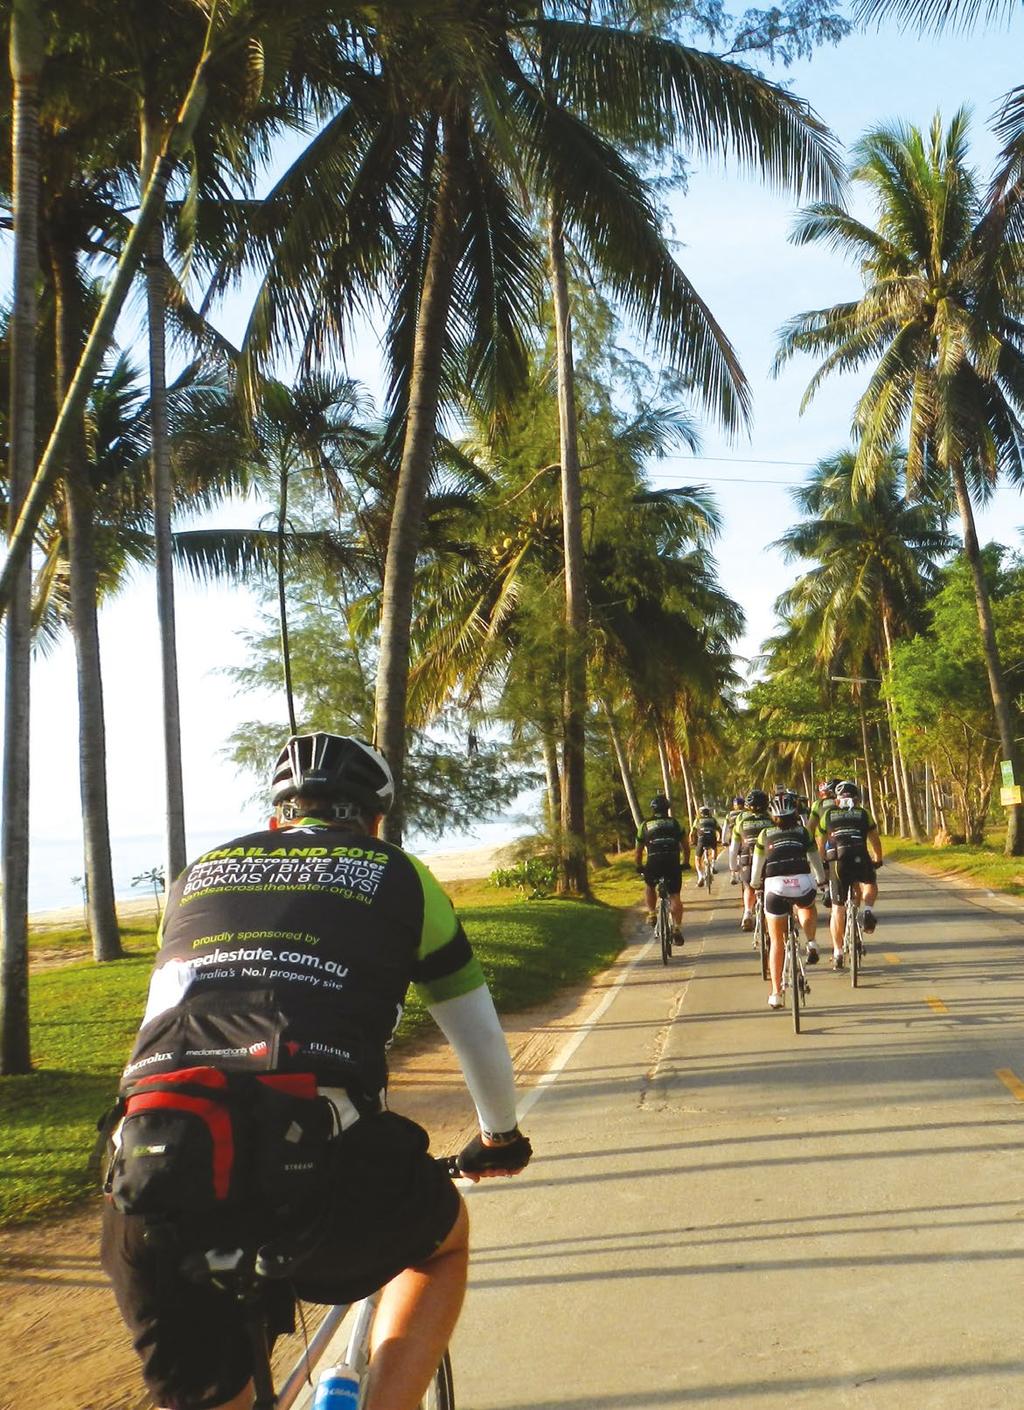 If you are a keen rider, there will be plenty of opportunities to stretch your legs and ride hard, but you will find the real pleasure is in riding with the group and sharing the journey.